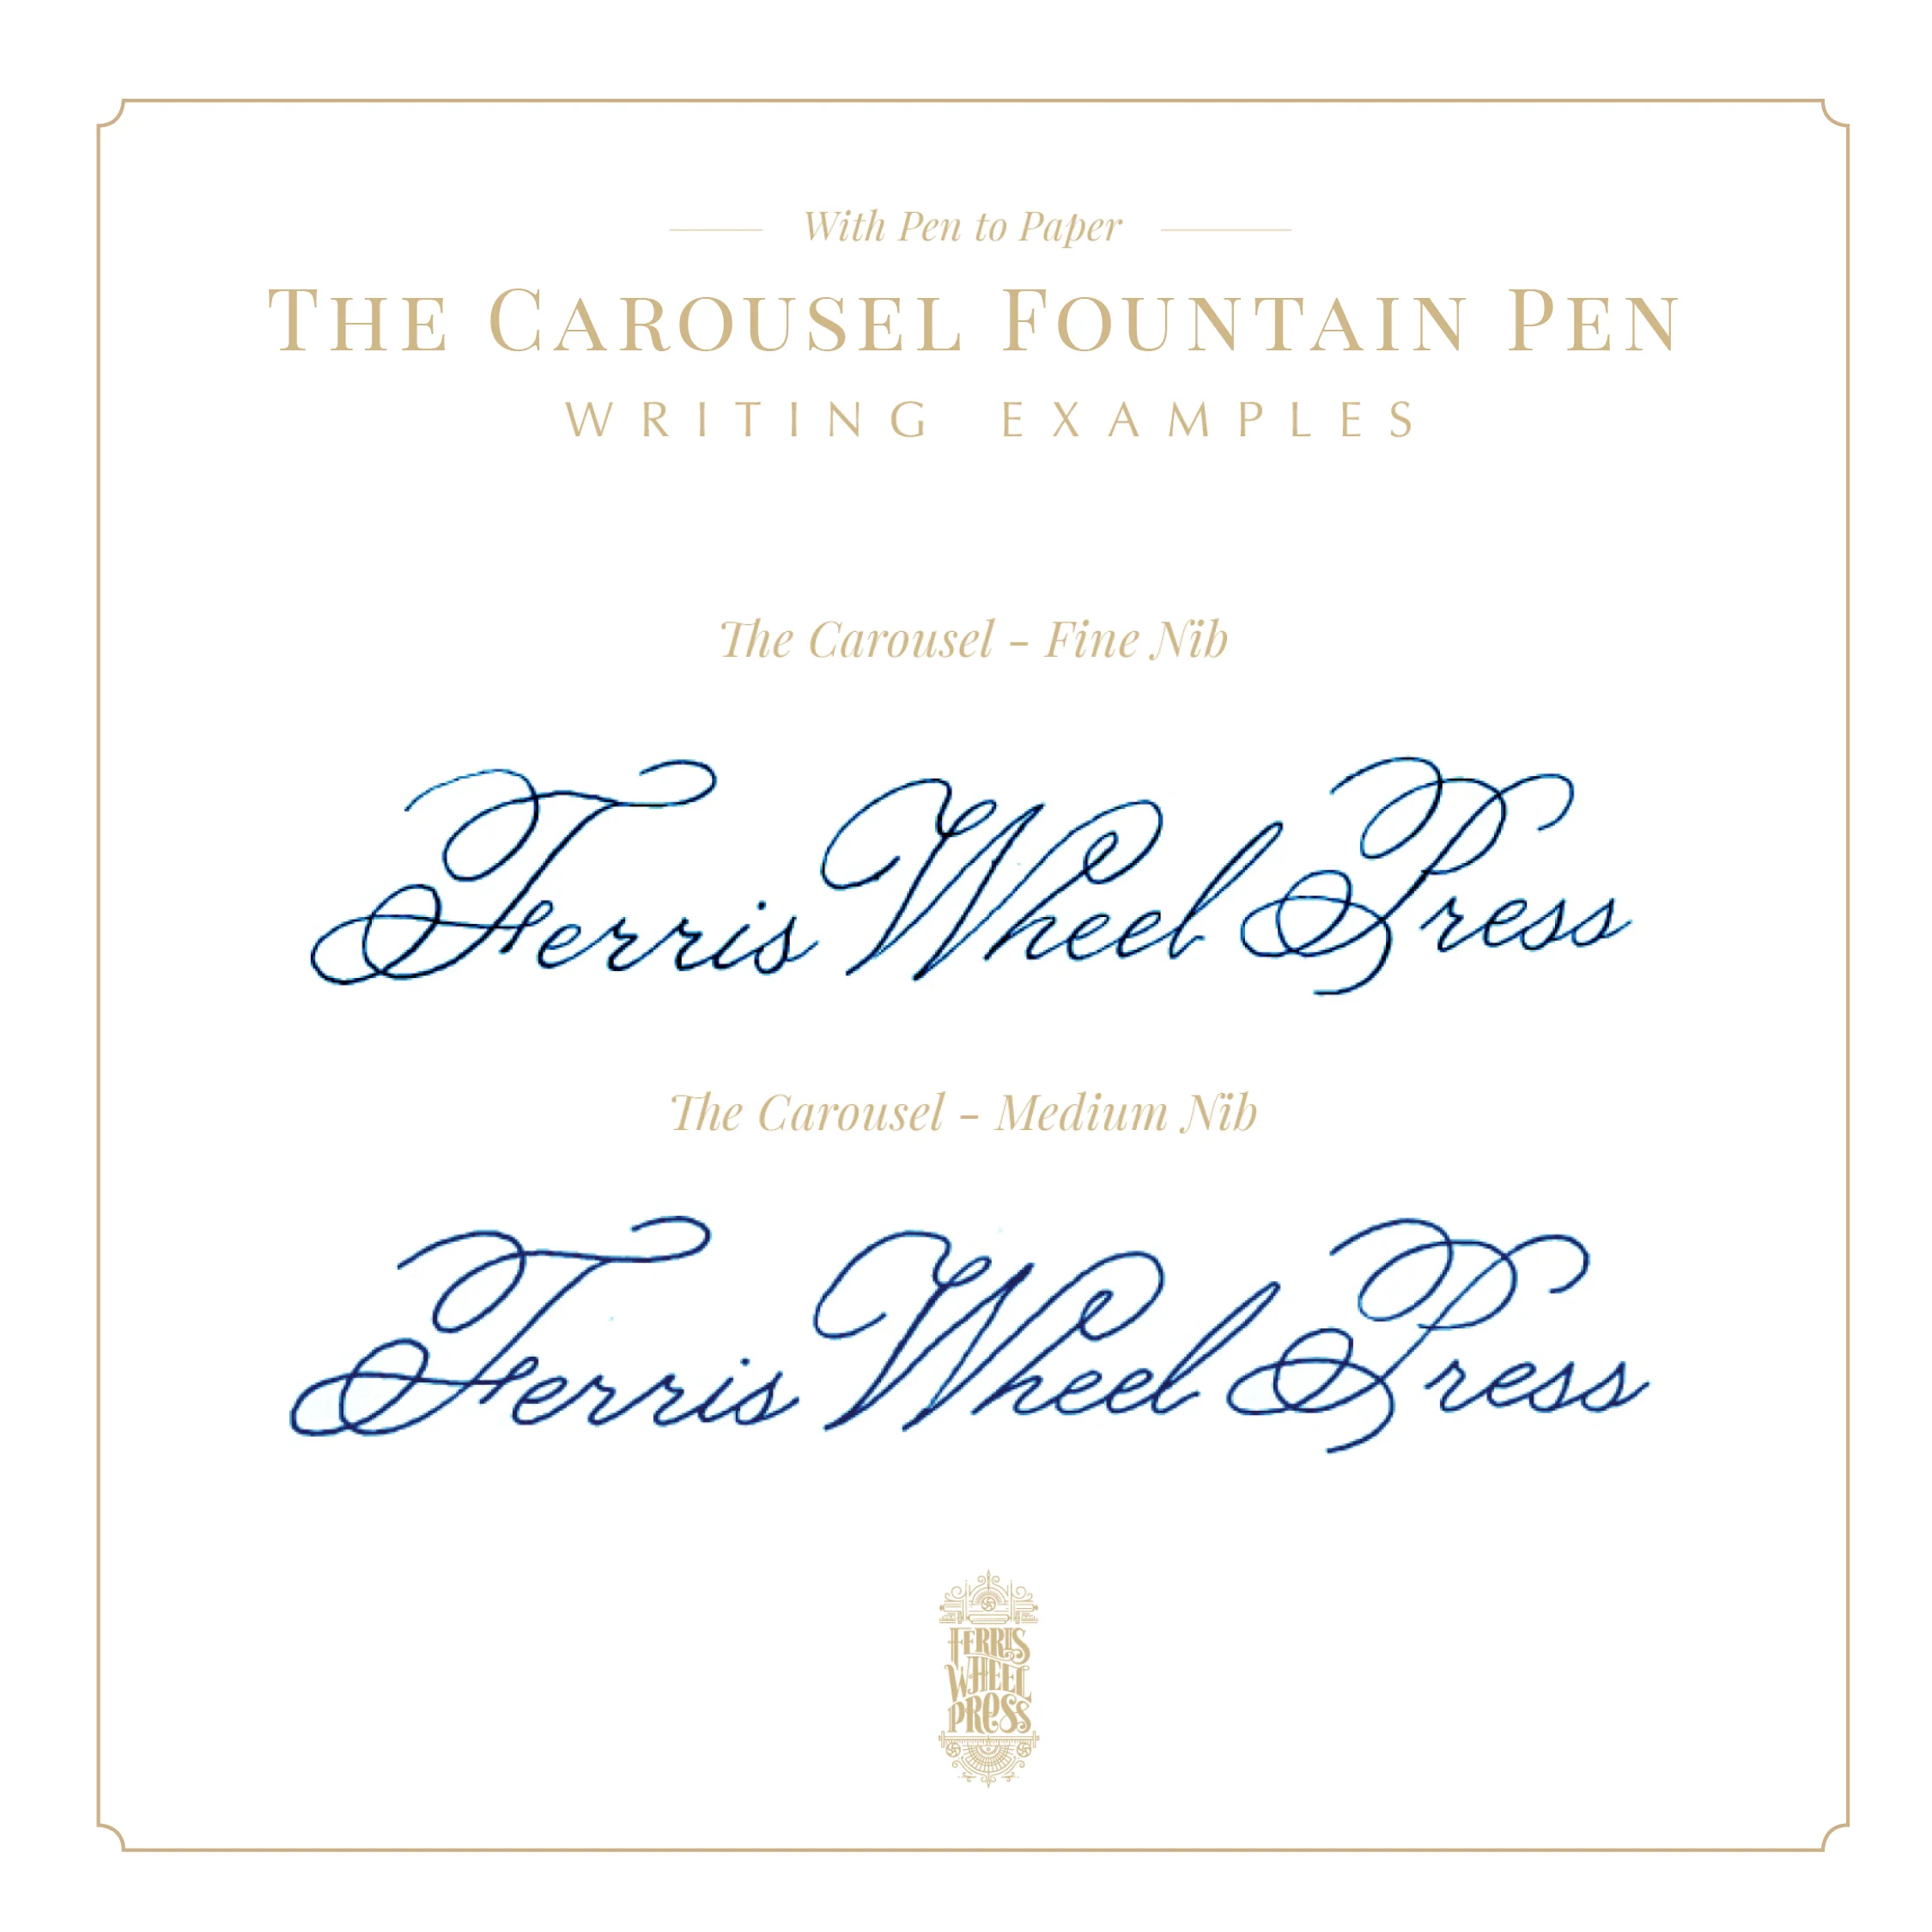 Ferris Wheel Press - The Carousel Fountain Pen - After Hours